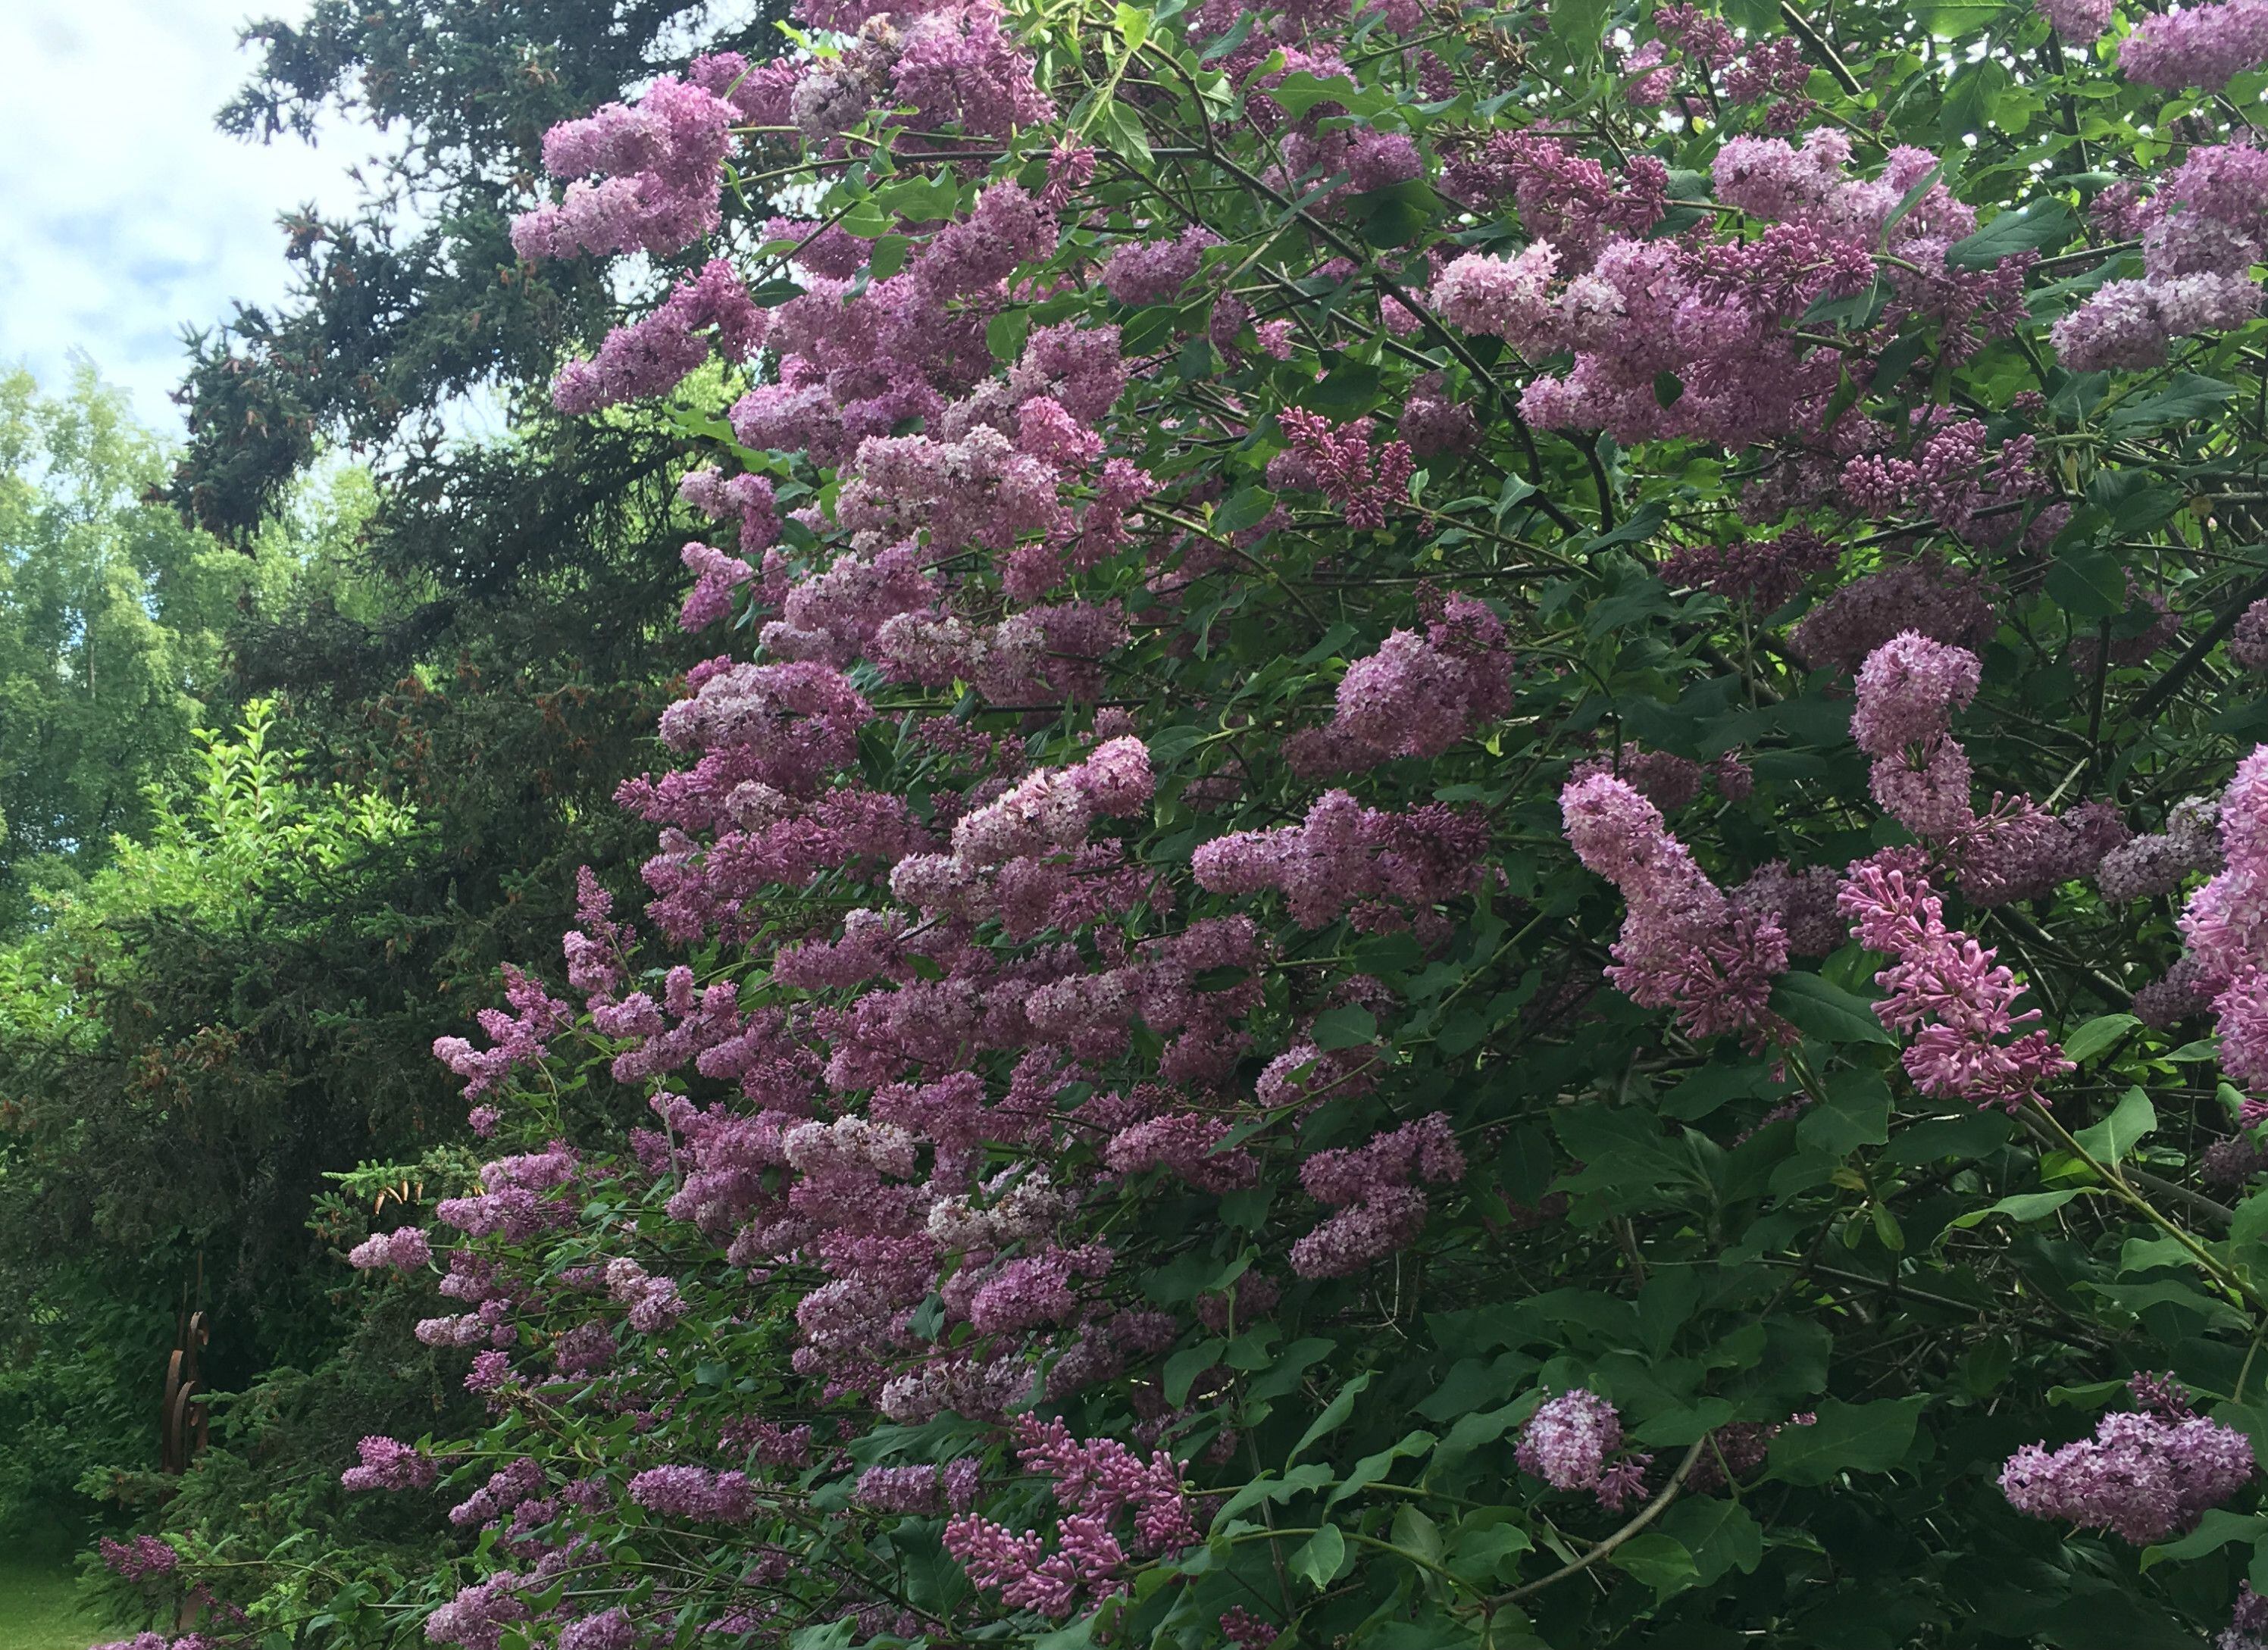 Her 'Sensation' lilac looks different this year. Enjoy! - Indiana Yard and  Garden - Purdue Consumer HorticulturePurdue University Indiana Yard and  Garden – Purdue Consumer Horticulture